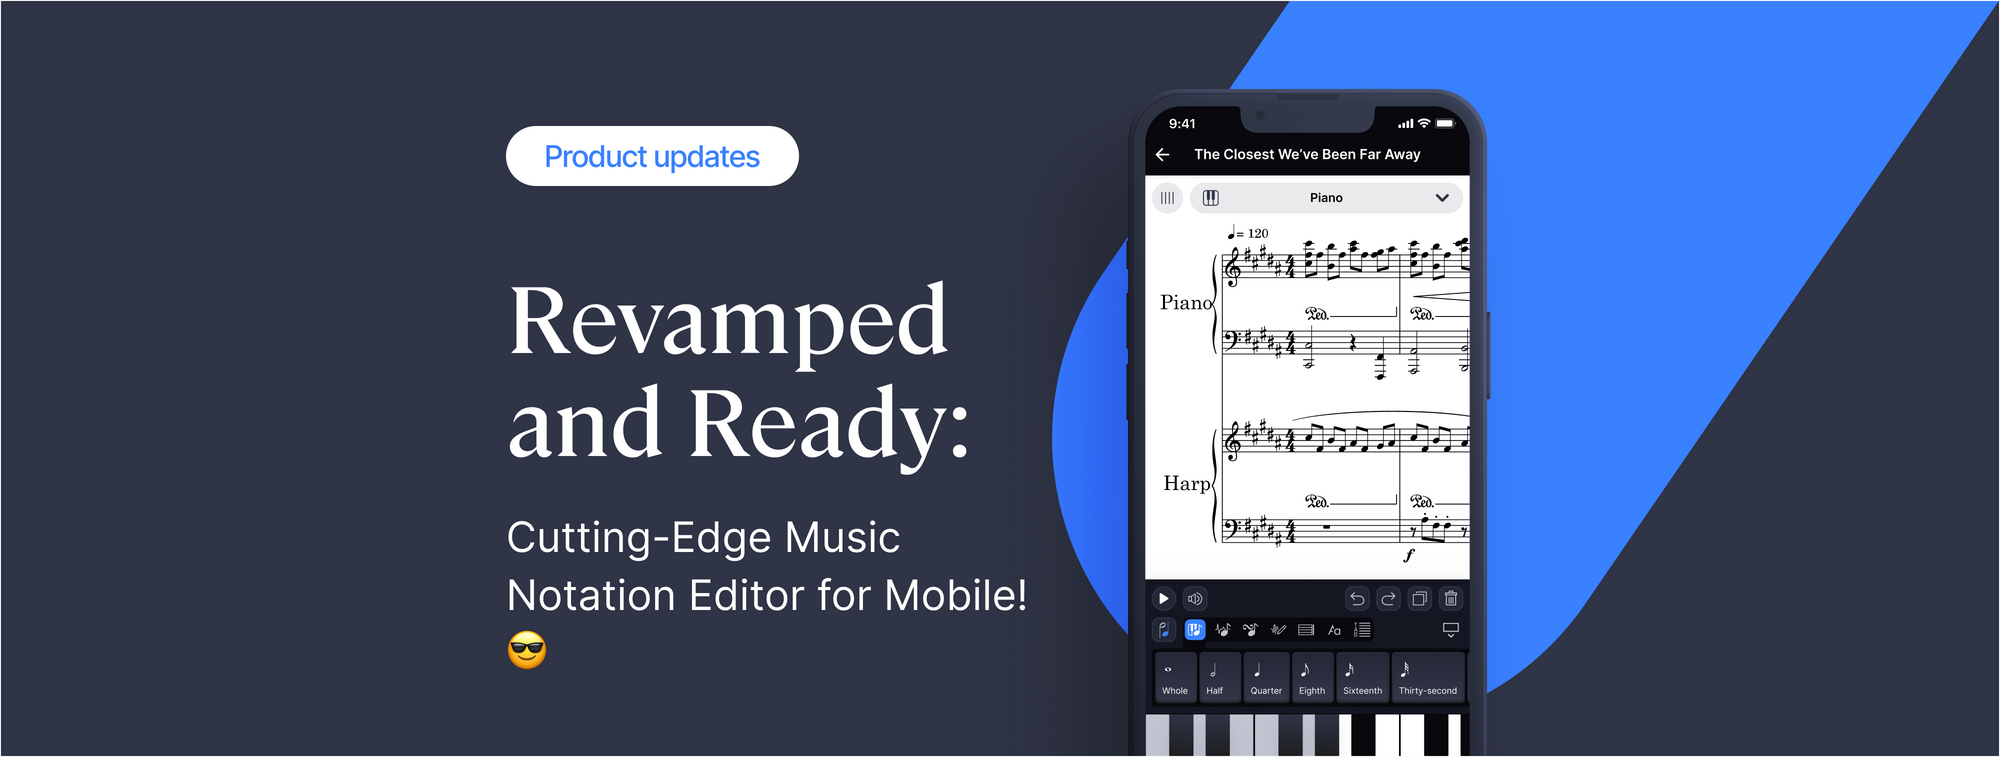 Revamped and Ready on Mobile: Flat's Cutting-Edge Music Notation Editor!